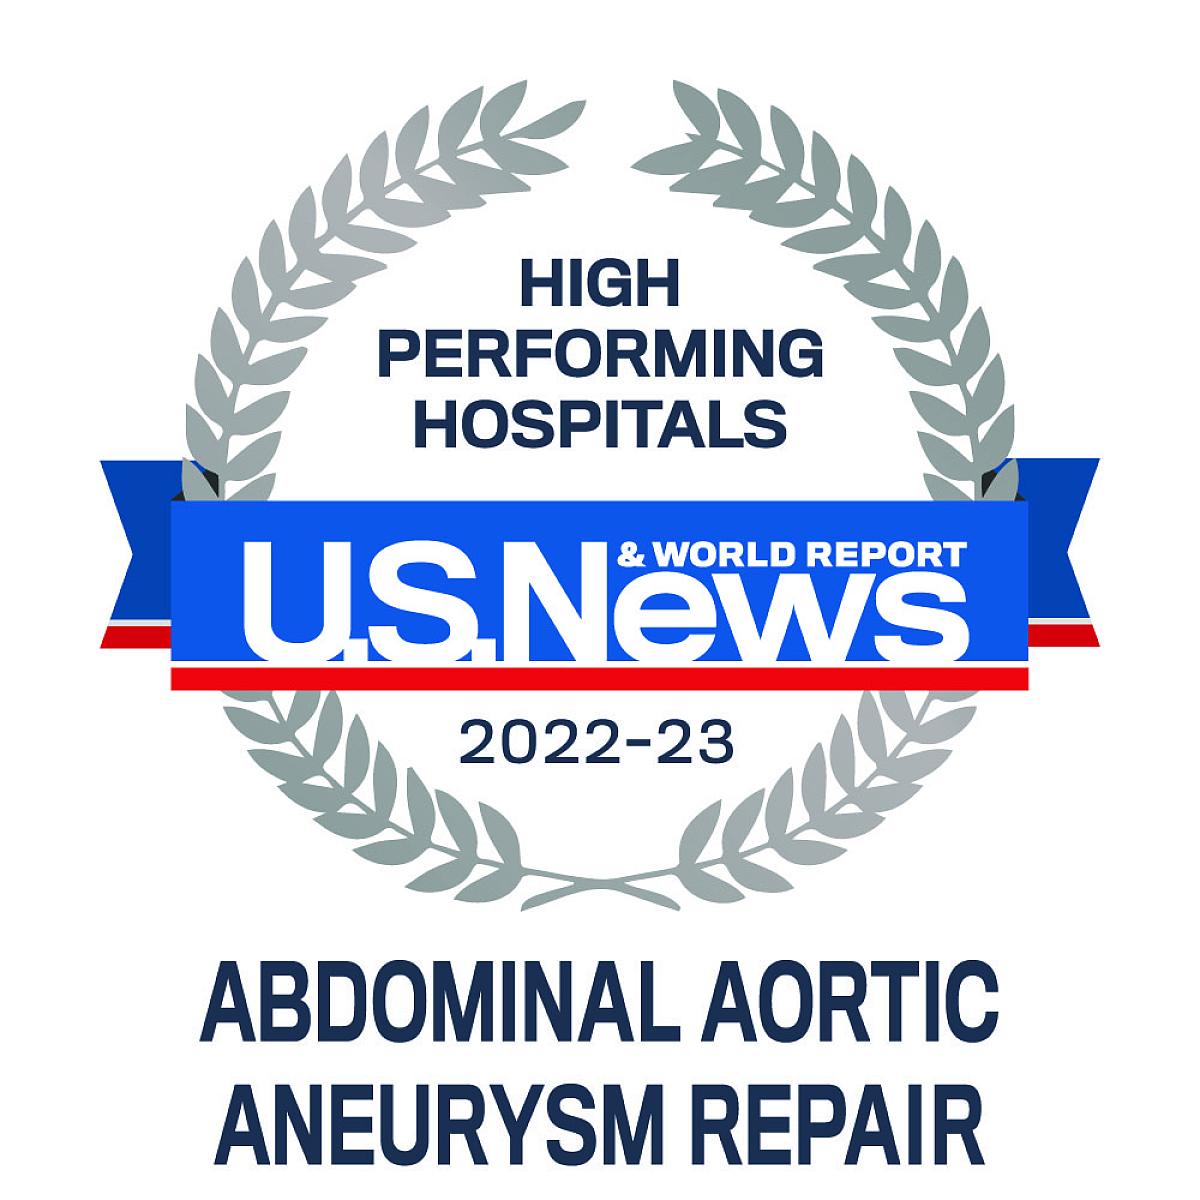 U.S. News and World Report High Performing Abdominal Aortic Aneurysm